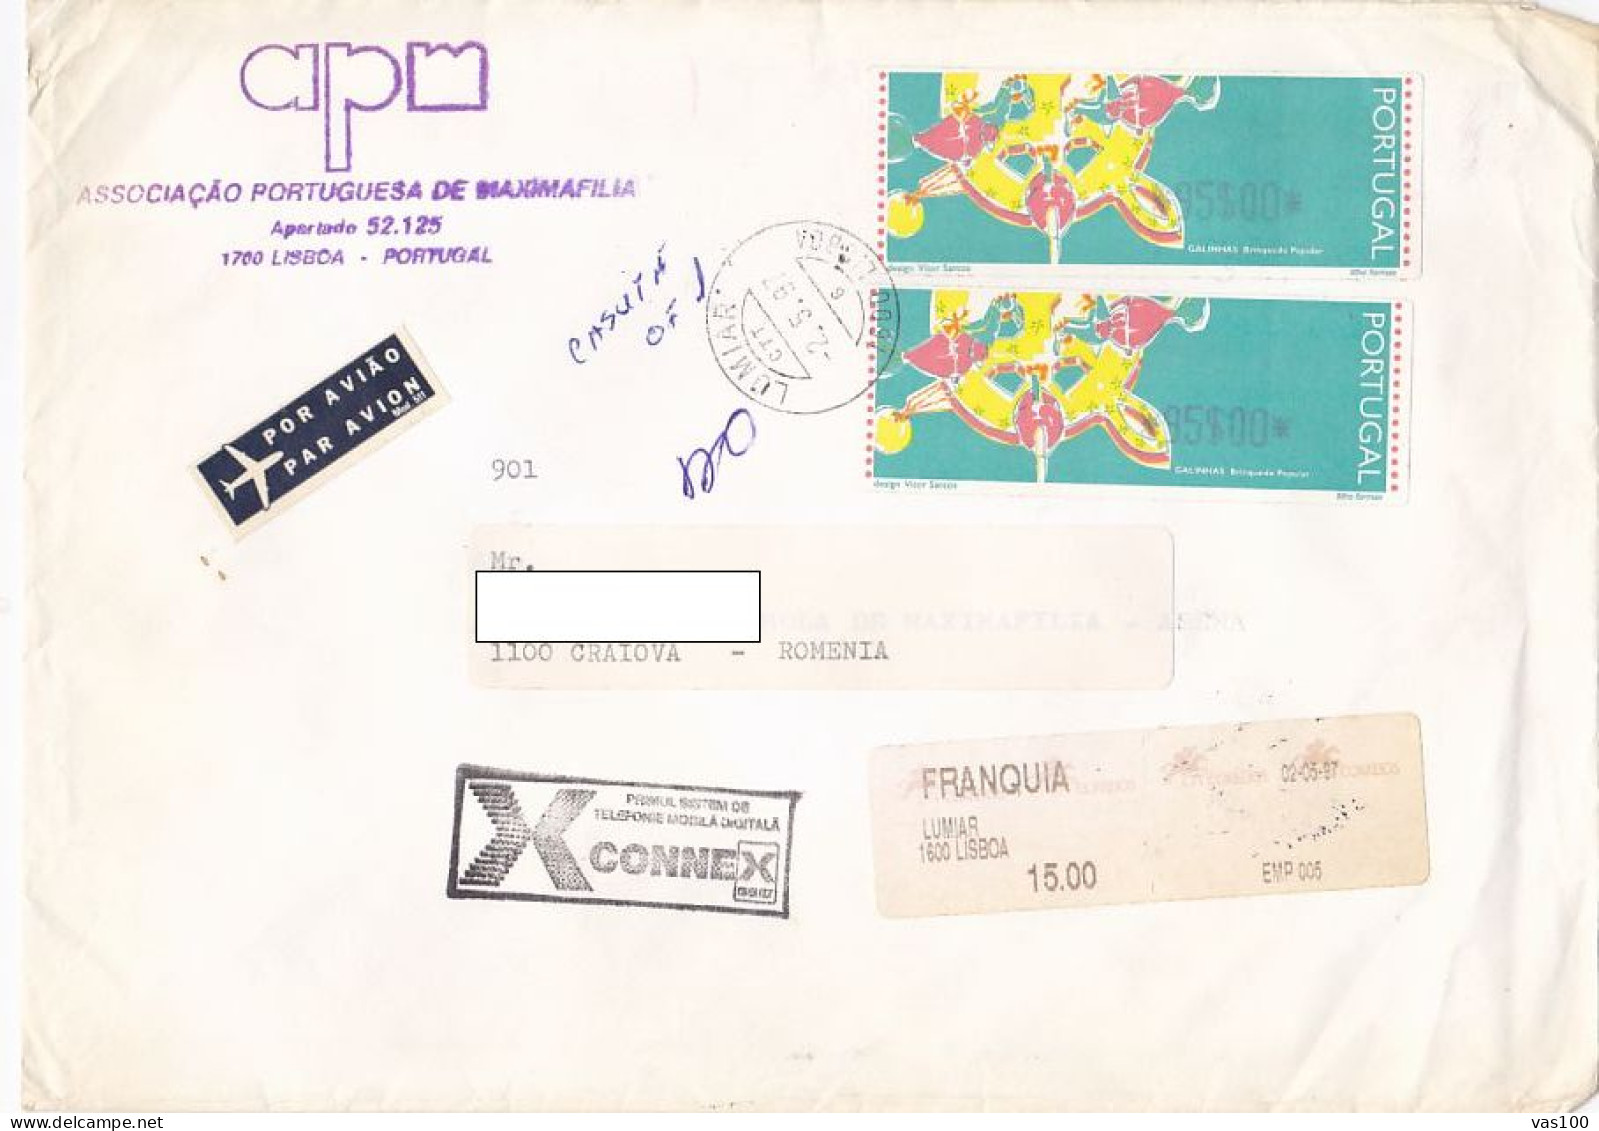 AMOUNT 95, MACHINE PRINTED STICKER STAMPS ON COVER, 1997, PORTUGAL - Covers & Documents